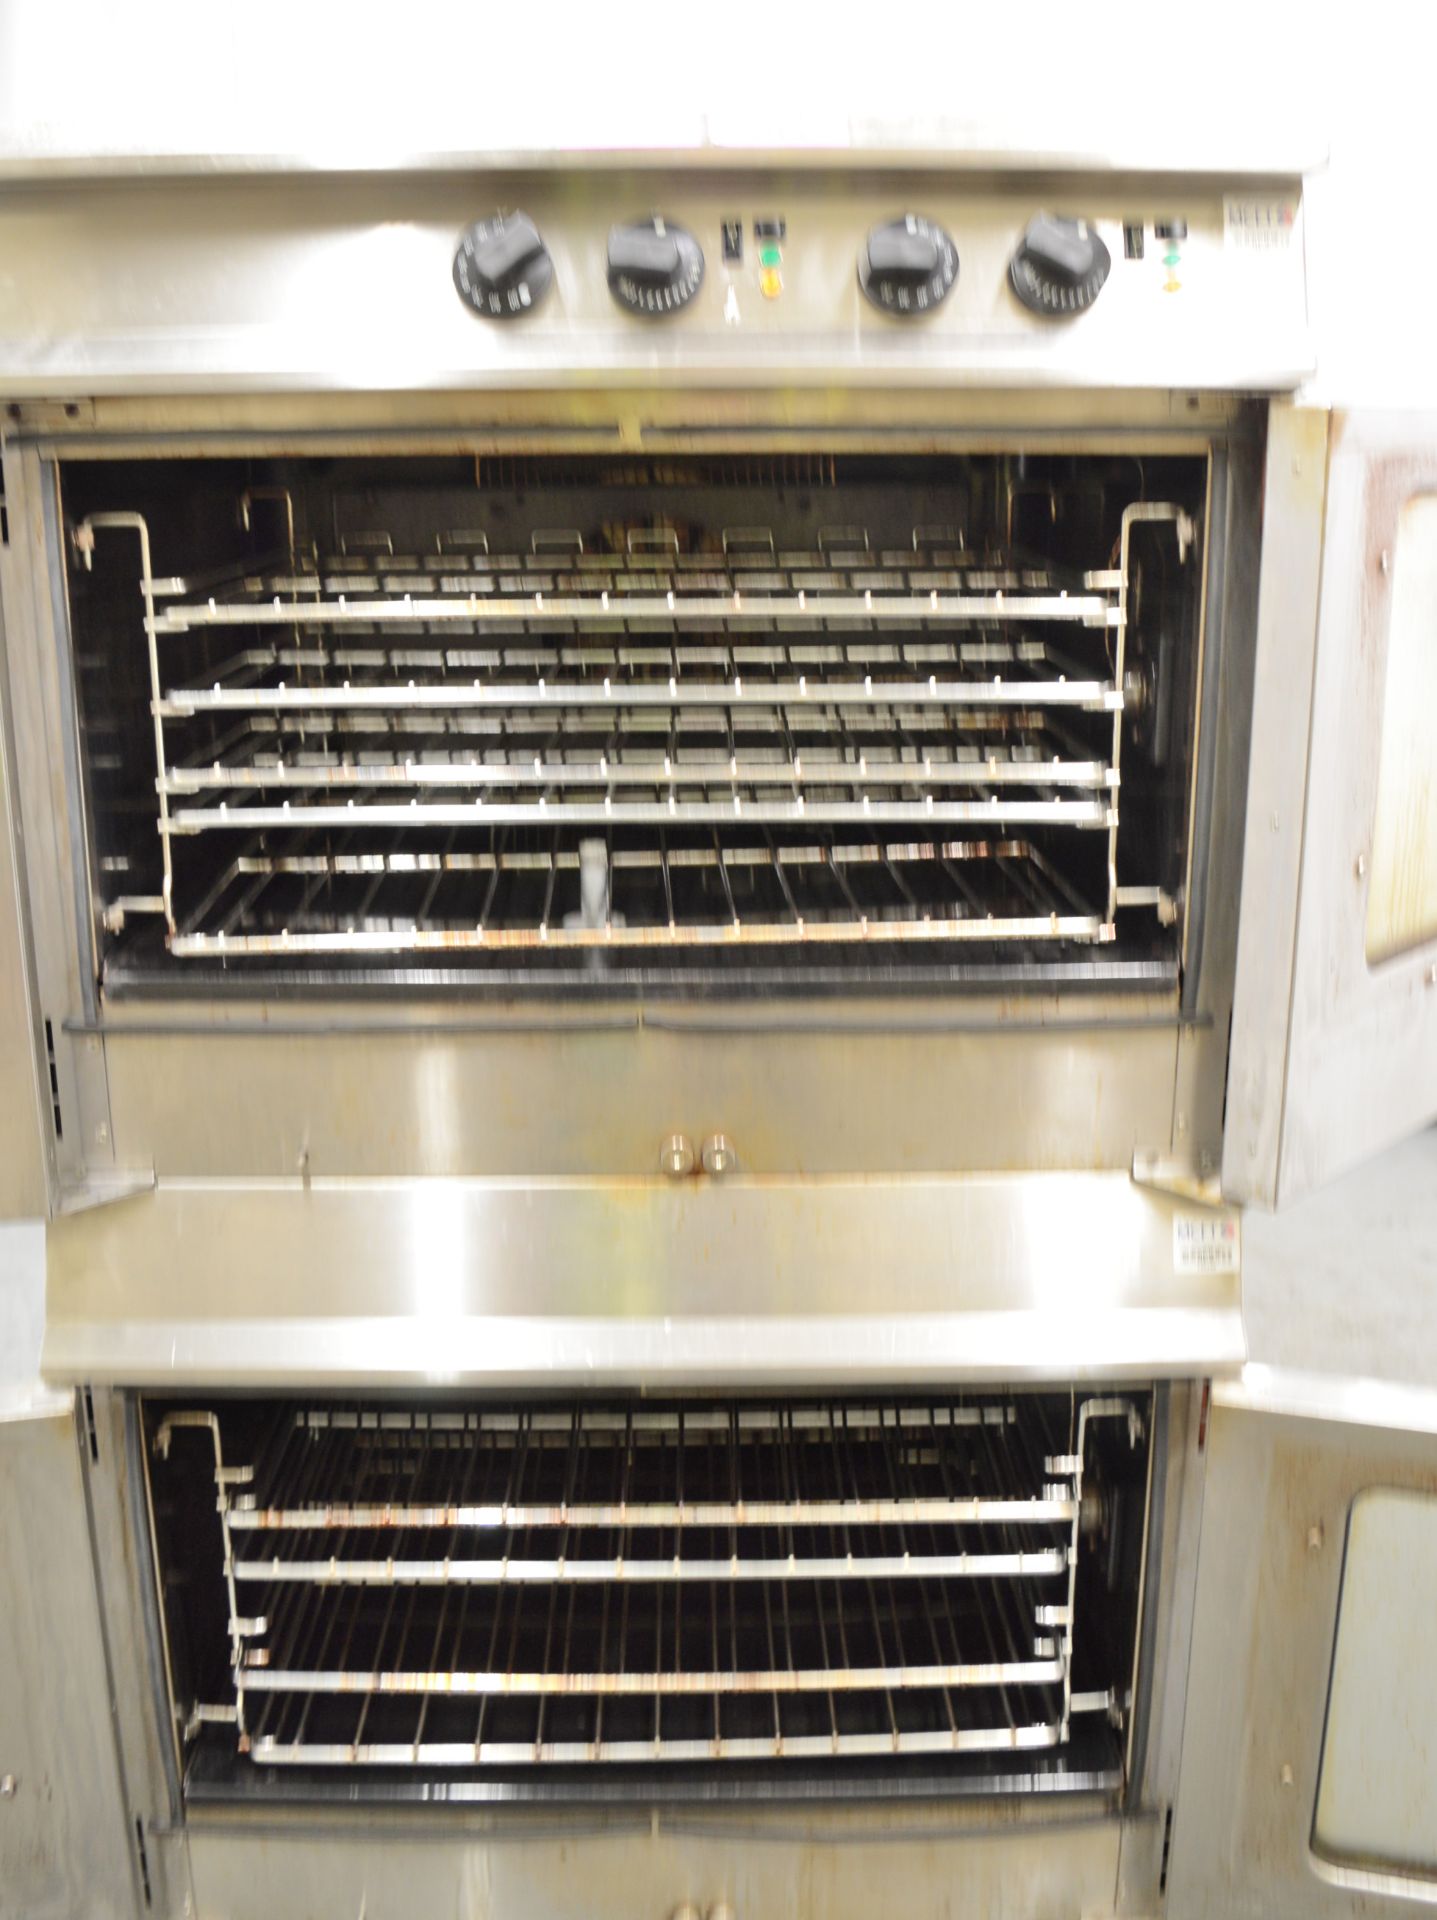 Moorwood Vulcan twin convection oven, natural gas - Image 6 of 9